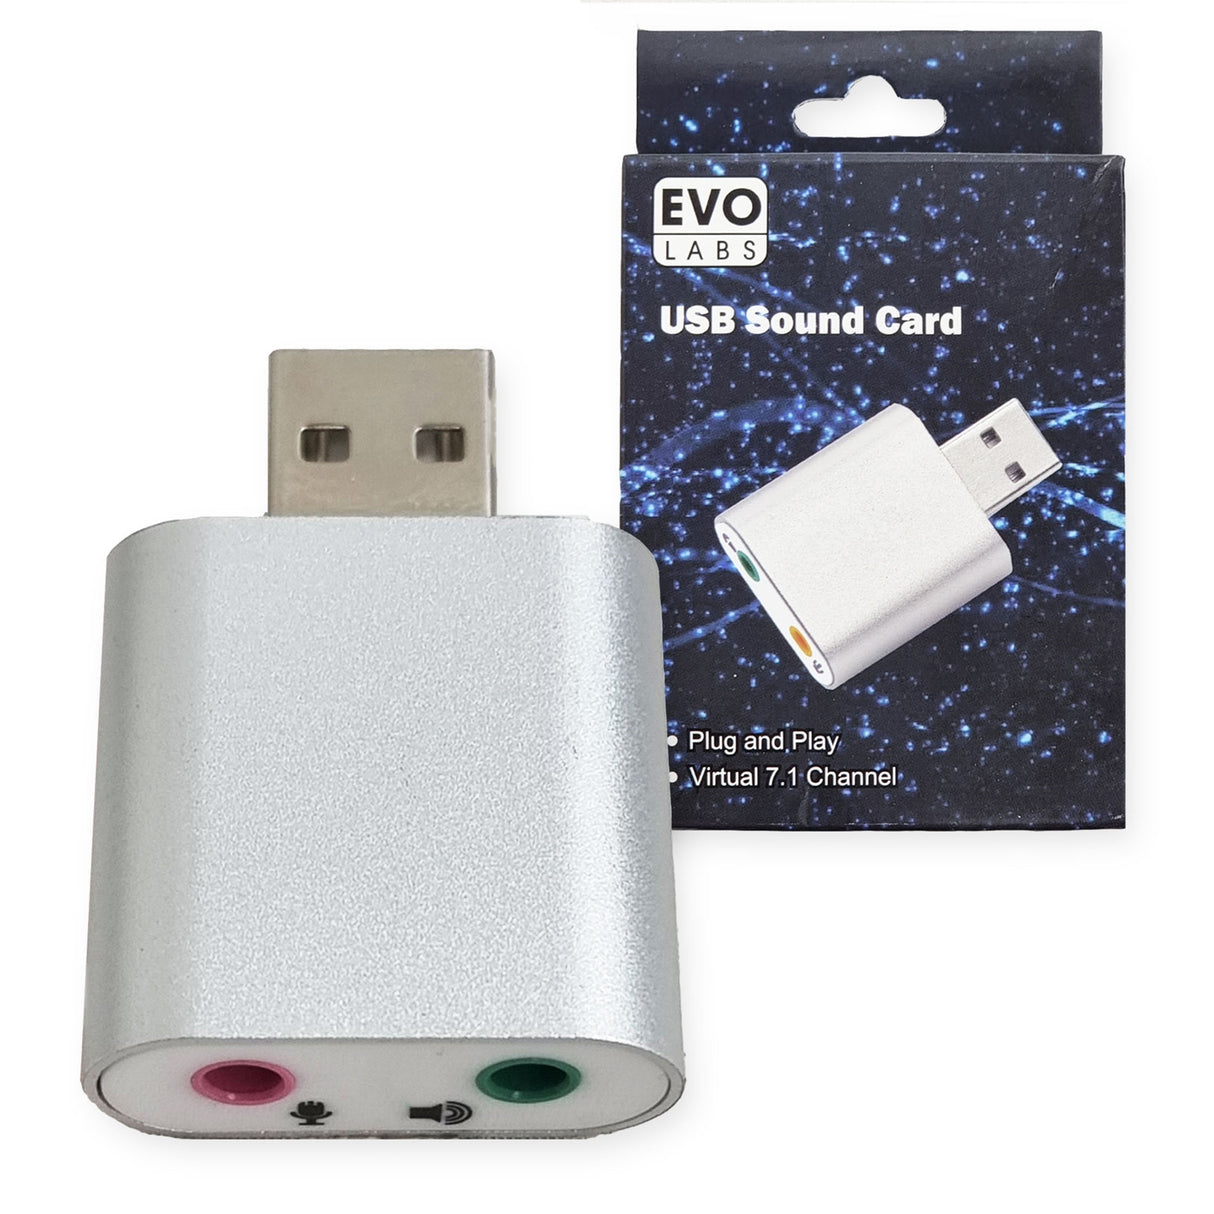 Evo Labs Plug and Play External USB Virtual 7.1 Channel Audio Sound Card Adapter, 3.5mm Headset Convertor & DAC